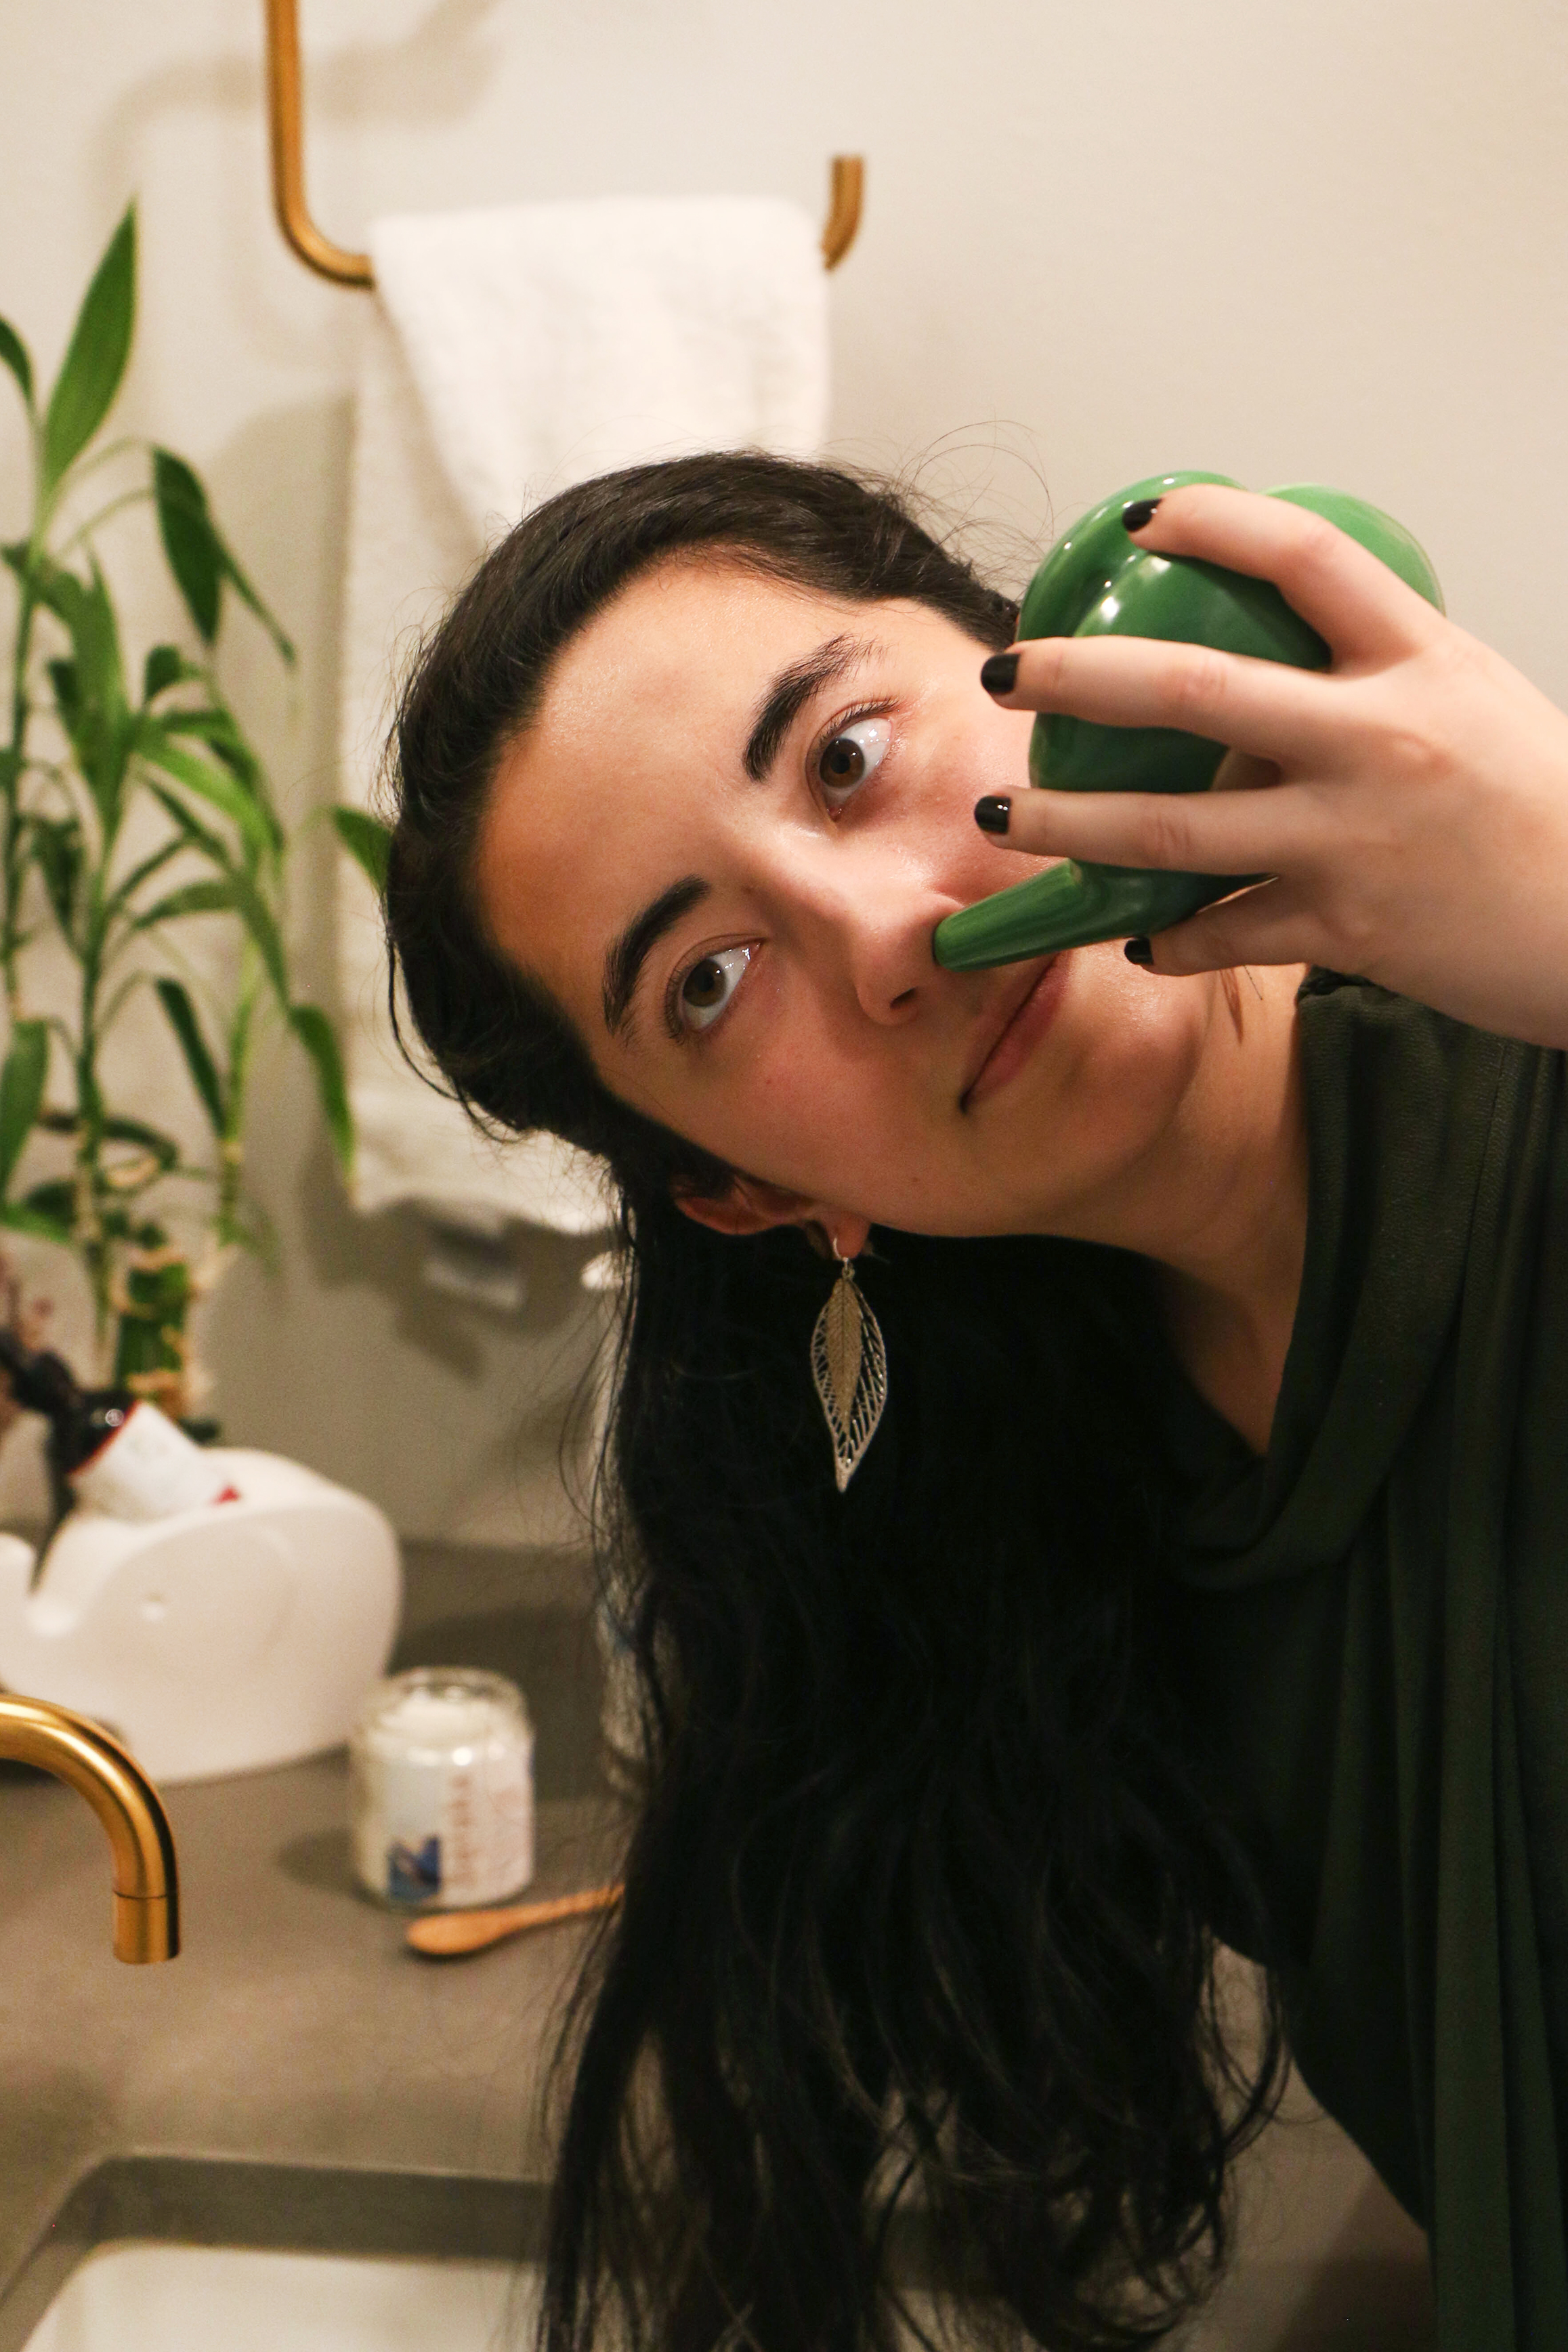 young-woman-with-long-dark-hair-wearing-green-top-and-feather-earrings-leaning-over-bathroom-sink-tipping-green-ceramic-neti-pot-for-sinus-clearing-into-one-nostril